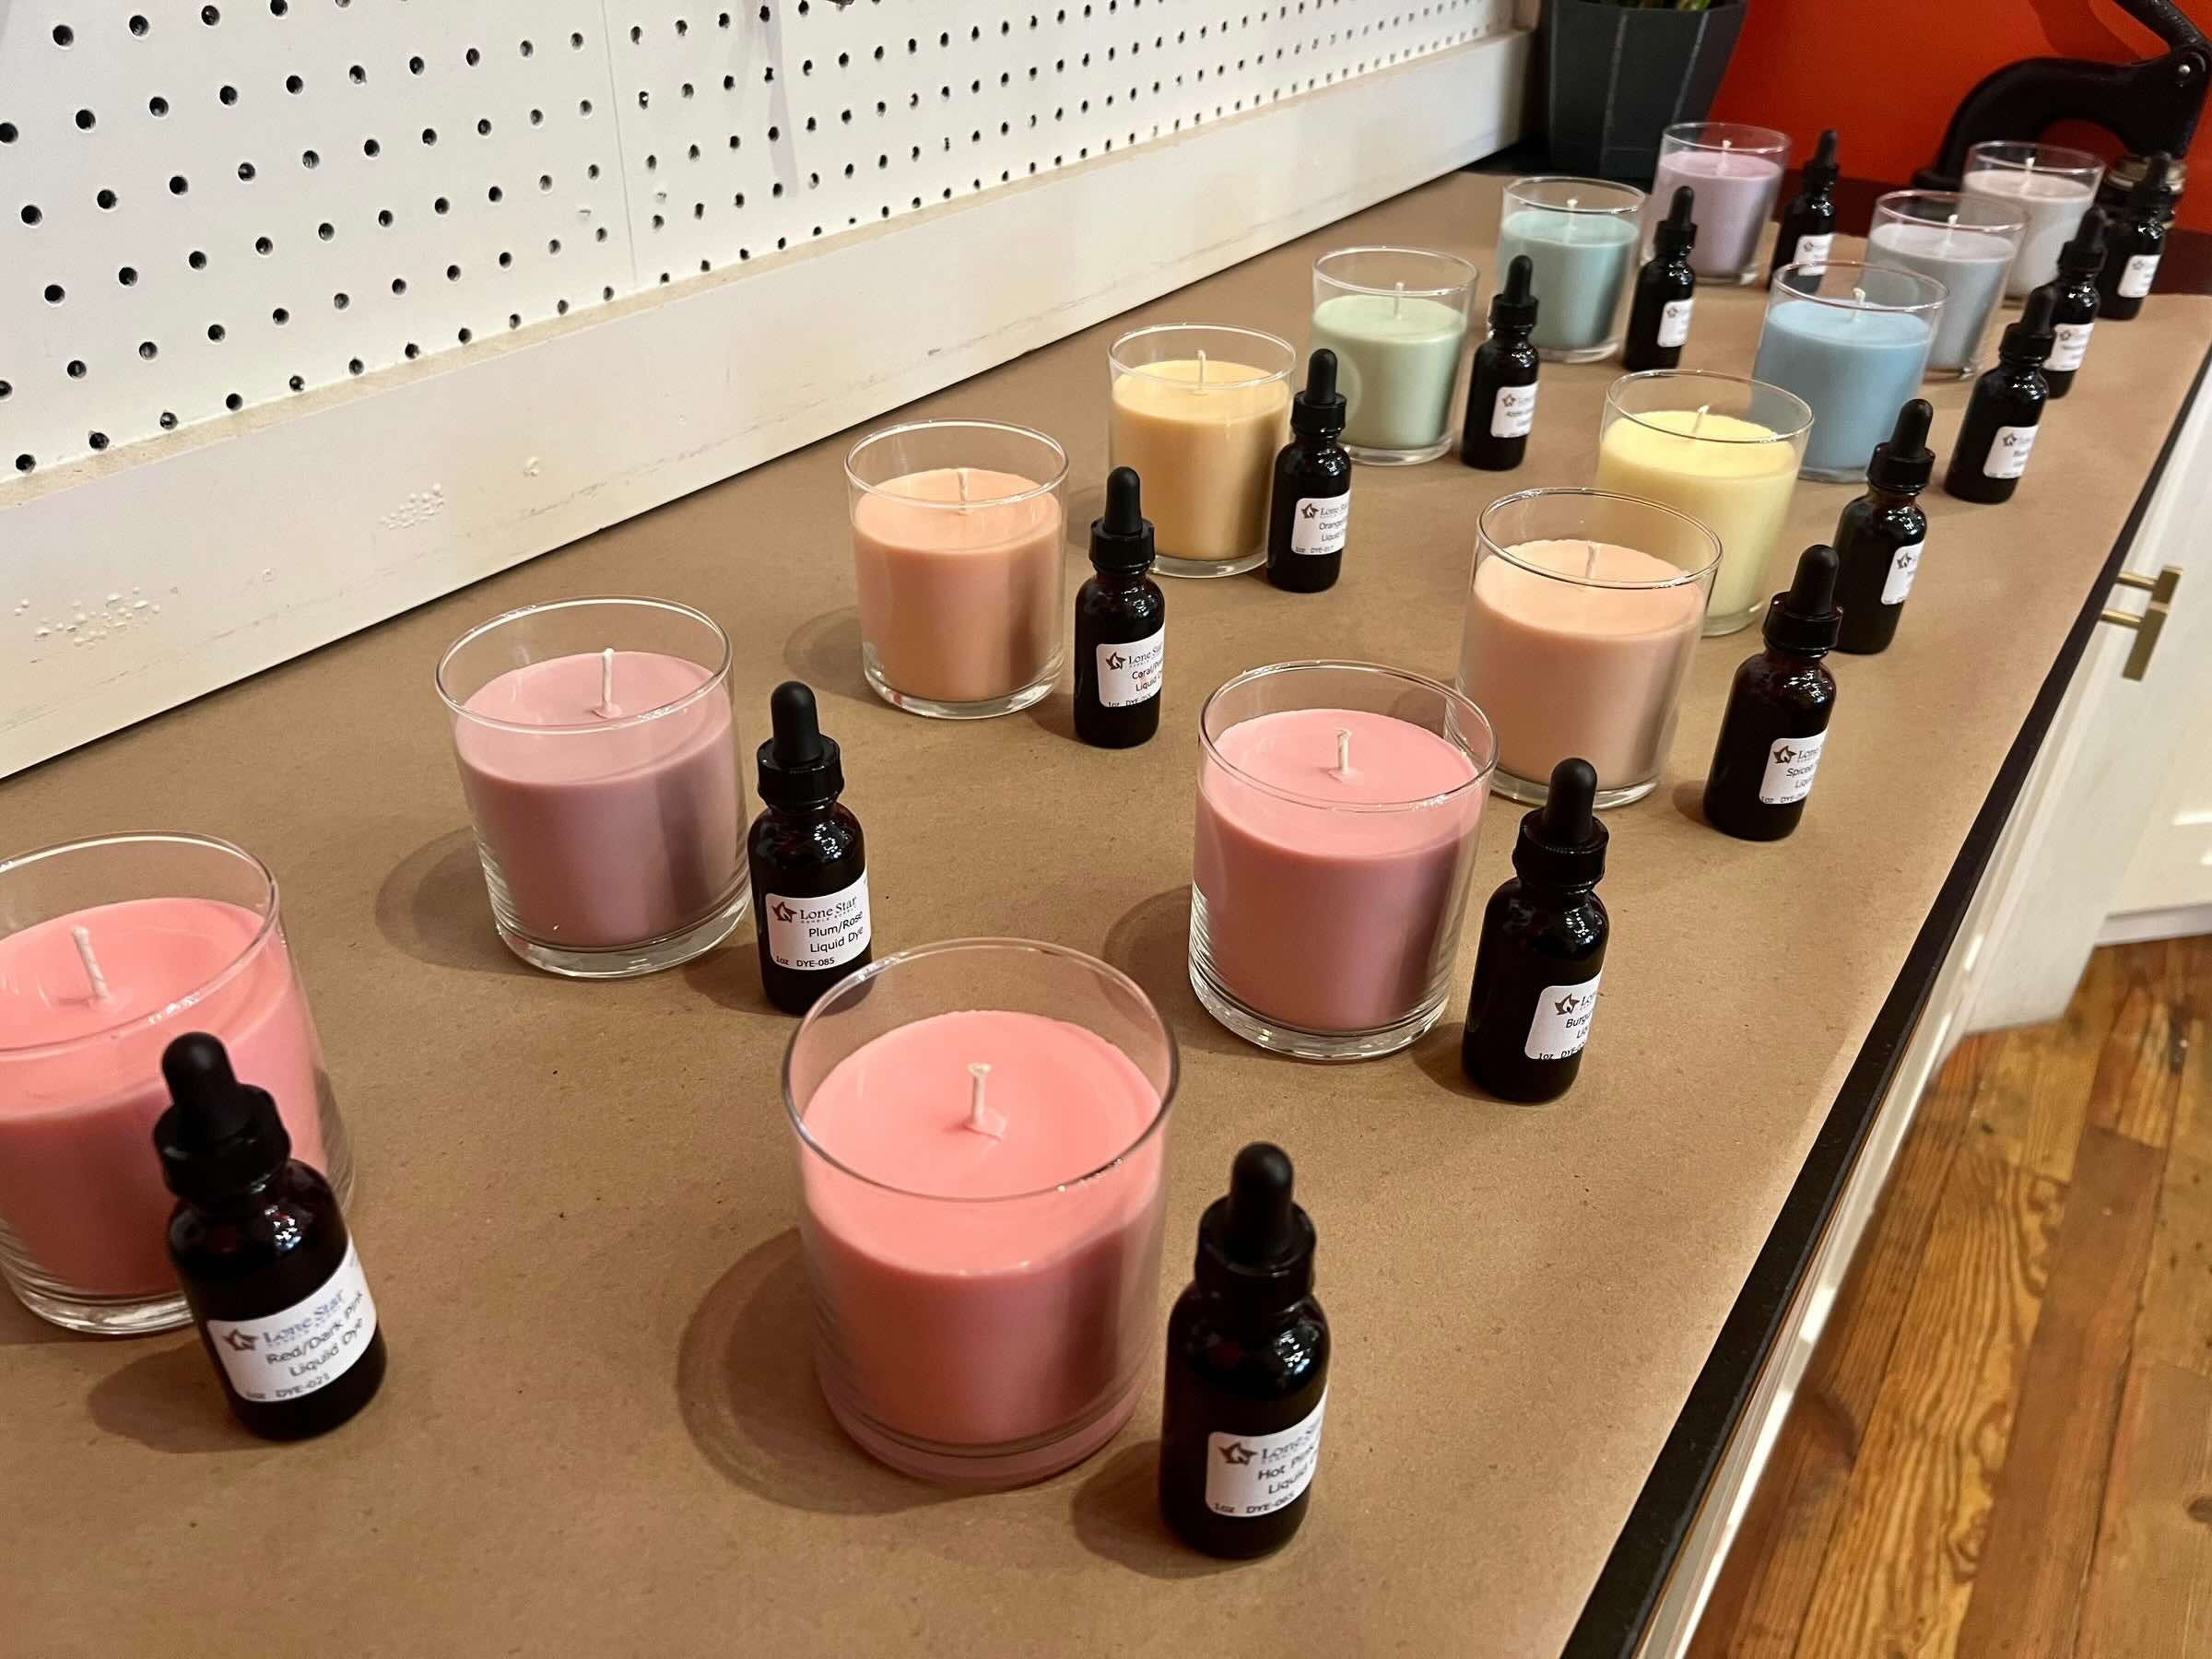 Candle Dye Review: Enhance Your Candle Making with Quality Dyes